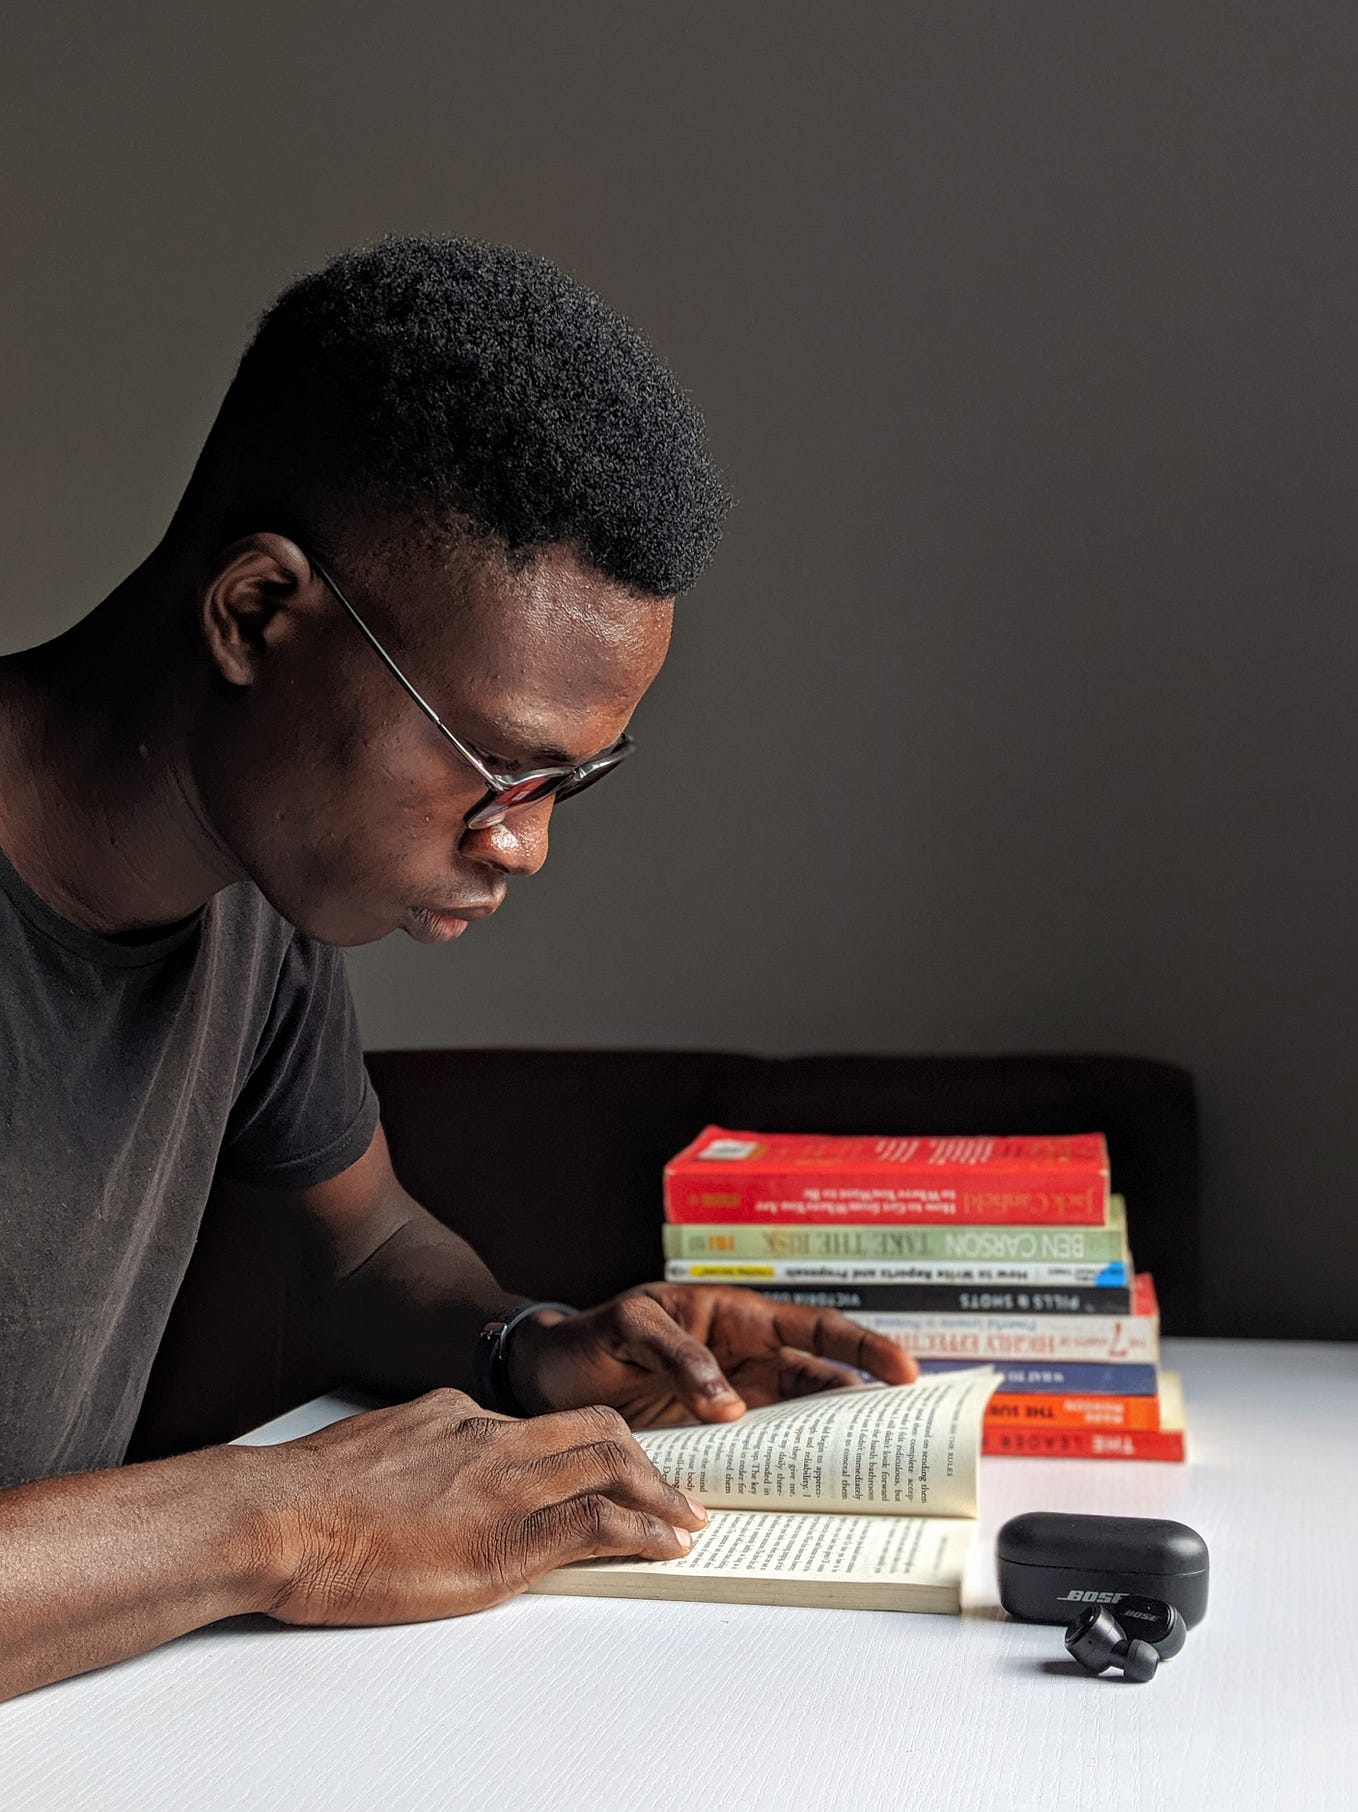 Black man reading at a desk with other books stacked next to him.